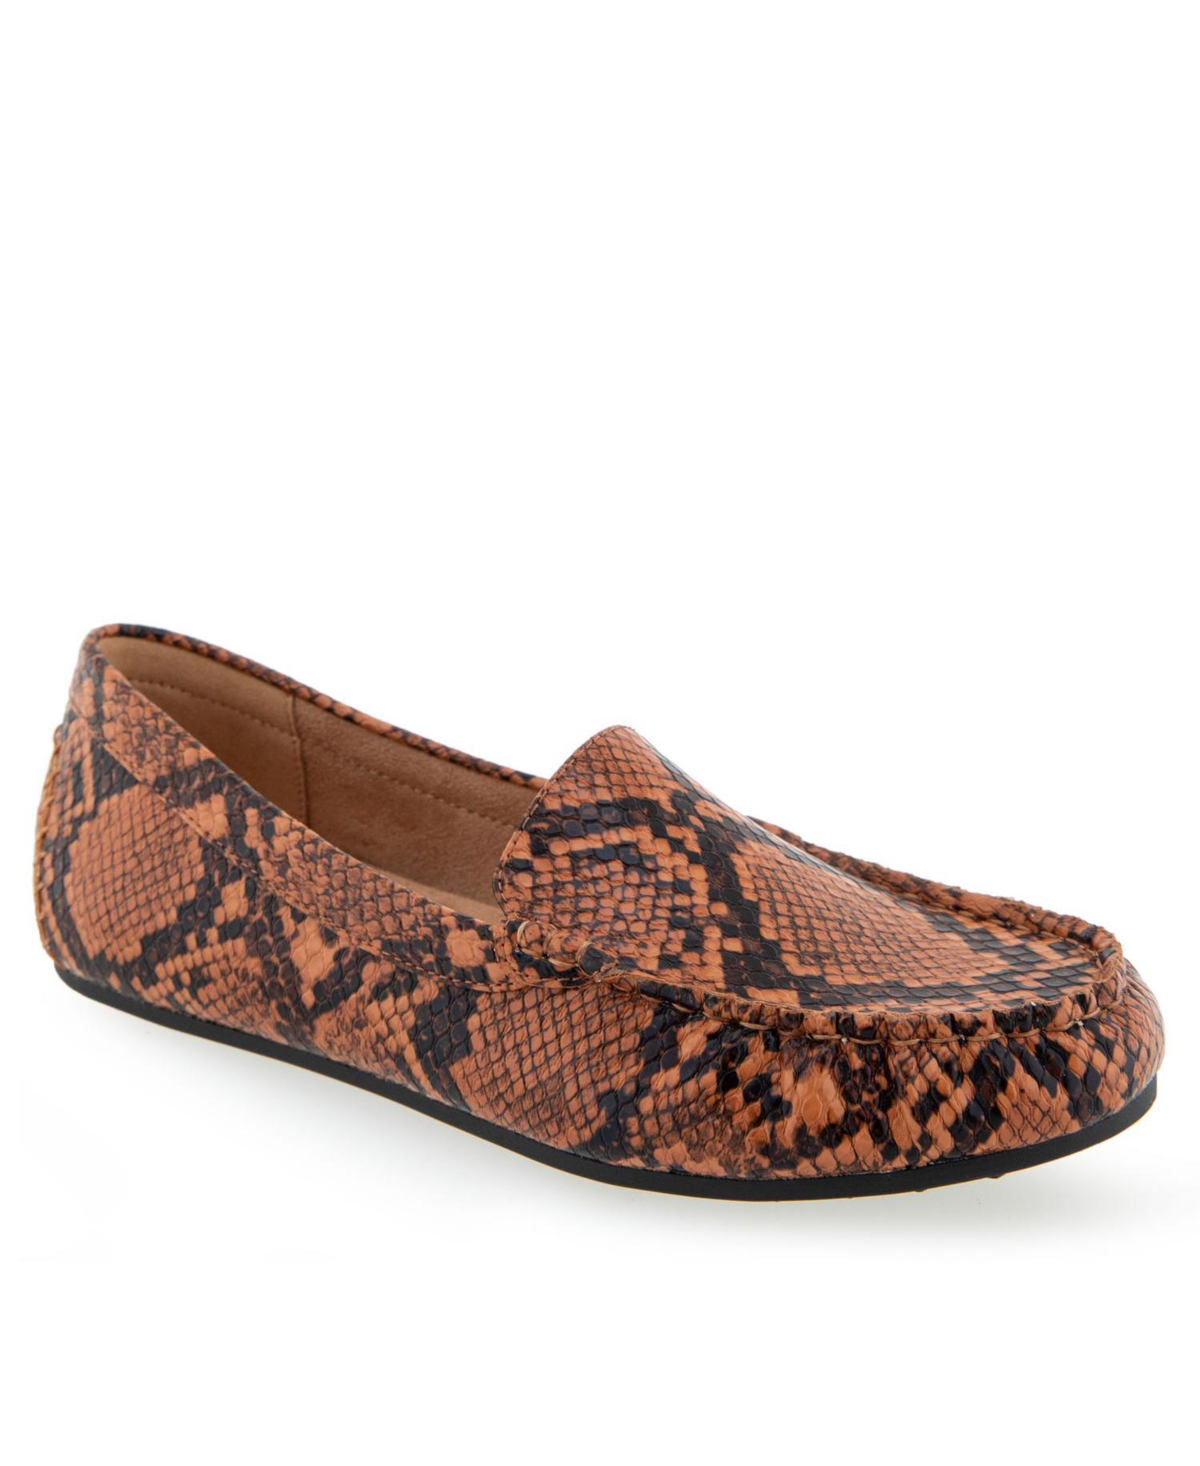 Aerosoles Women's Over Drive Driving Style Loafers In Tan Printed Faux Snake - Faux Leather